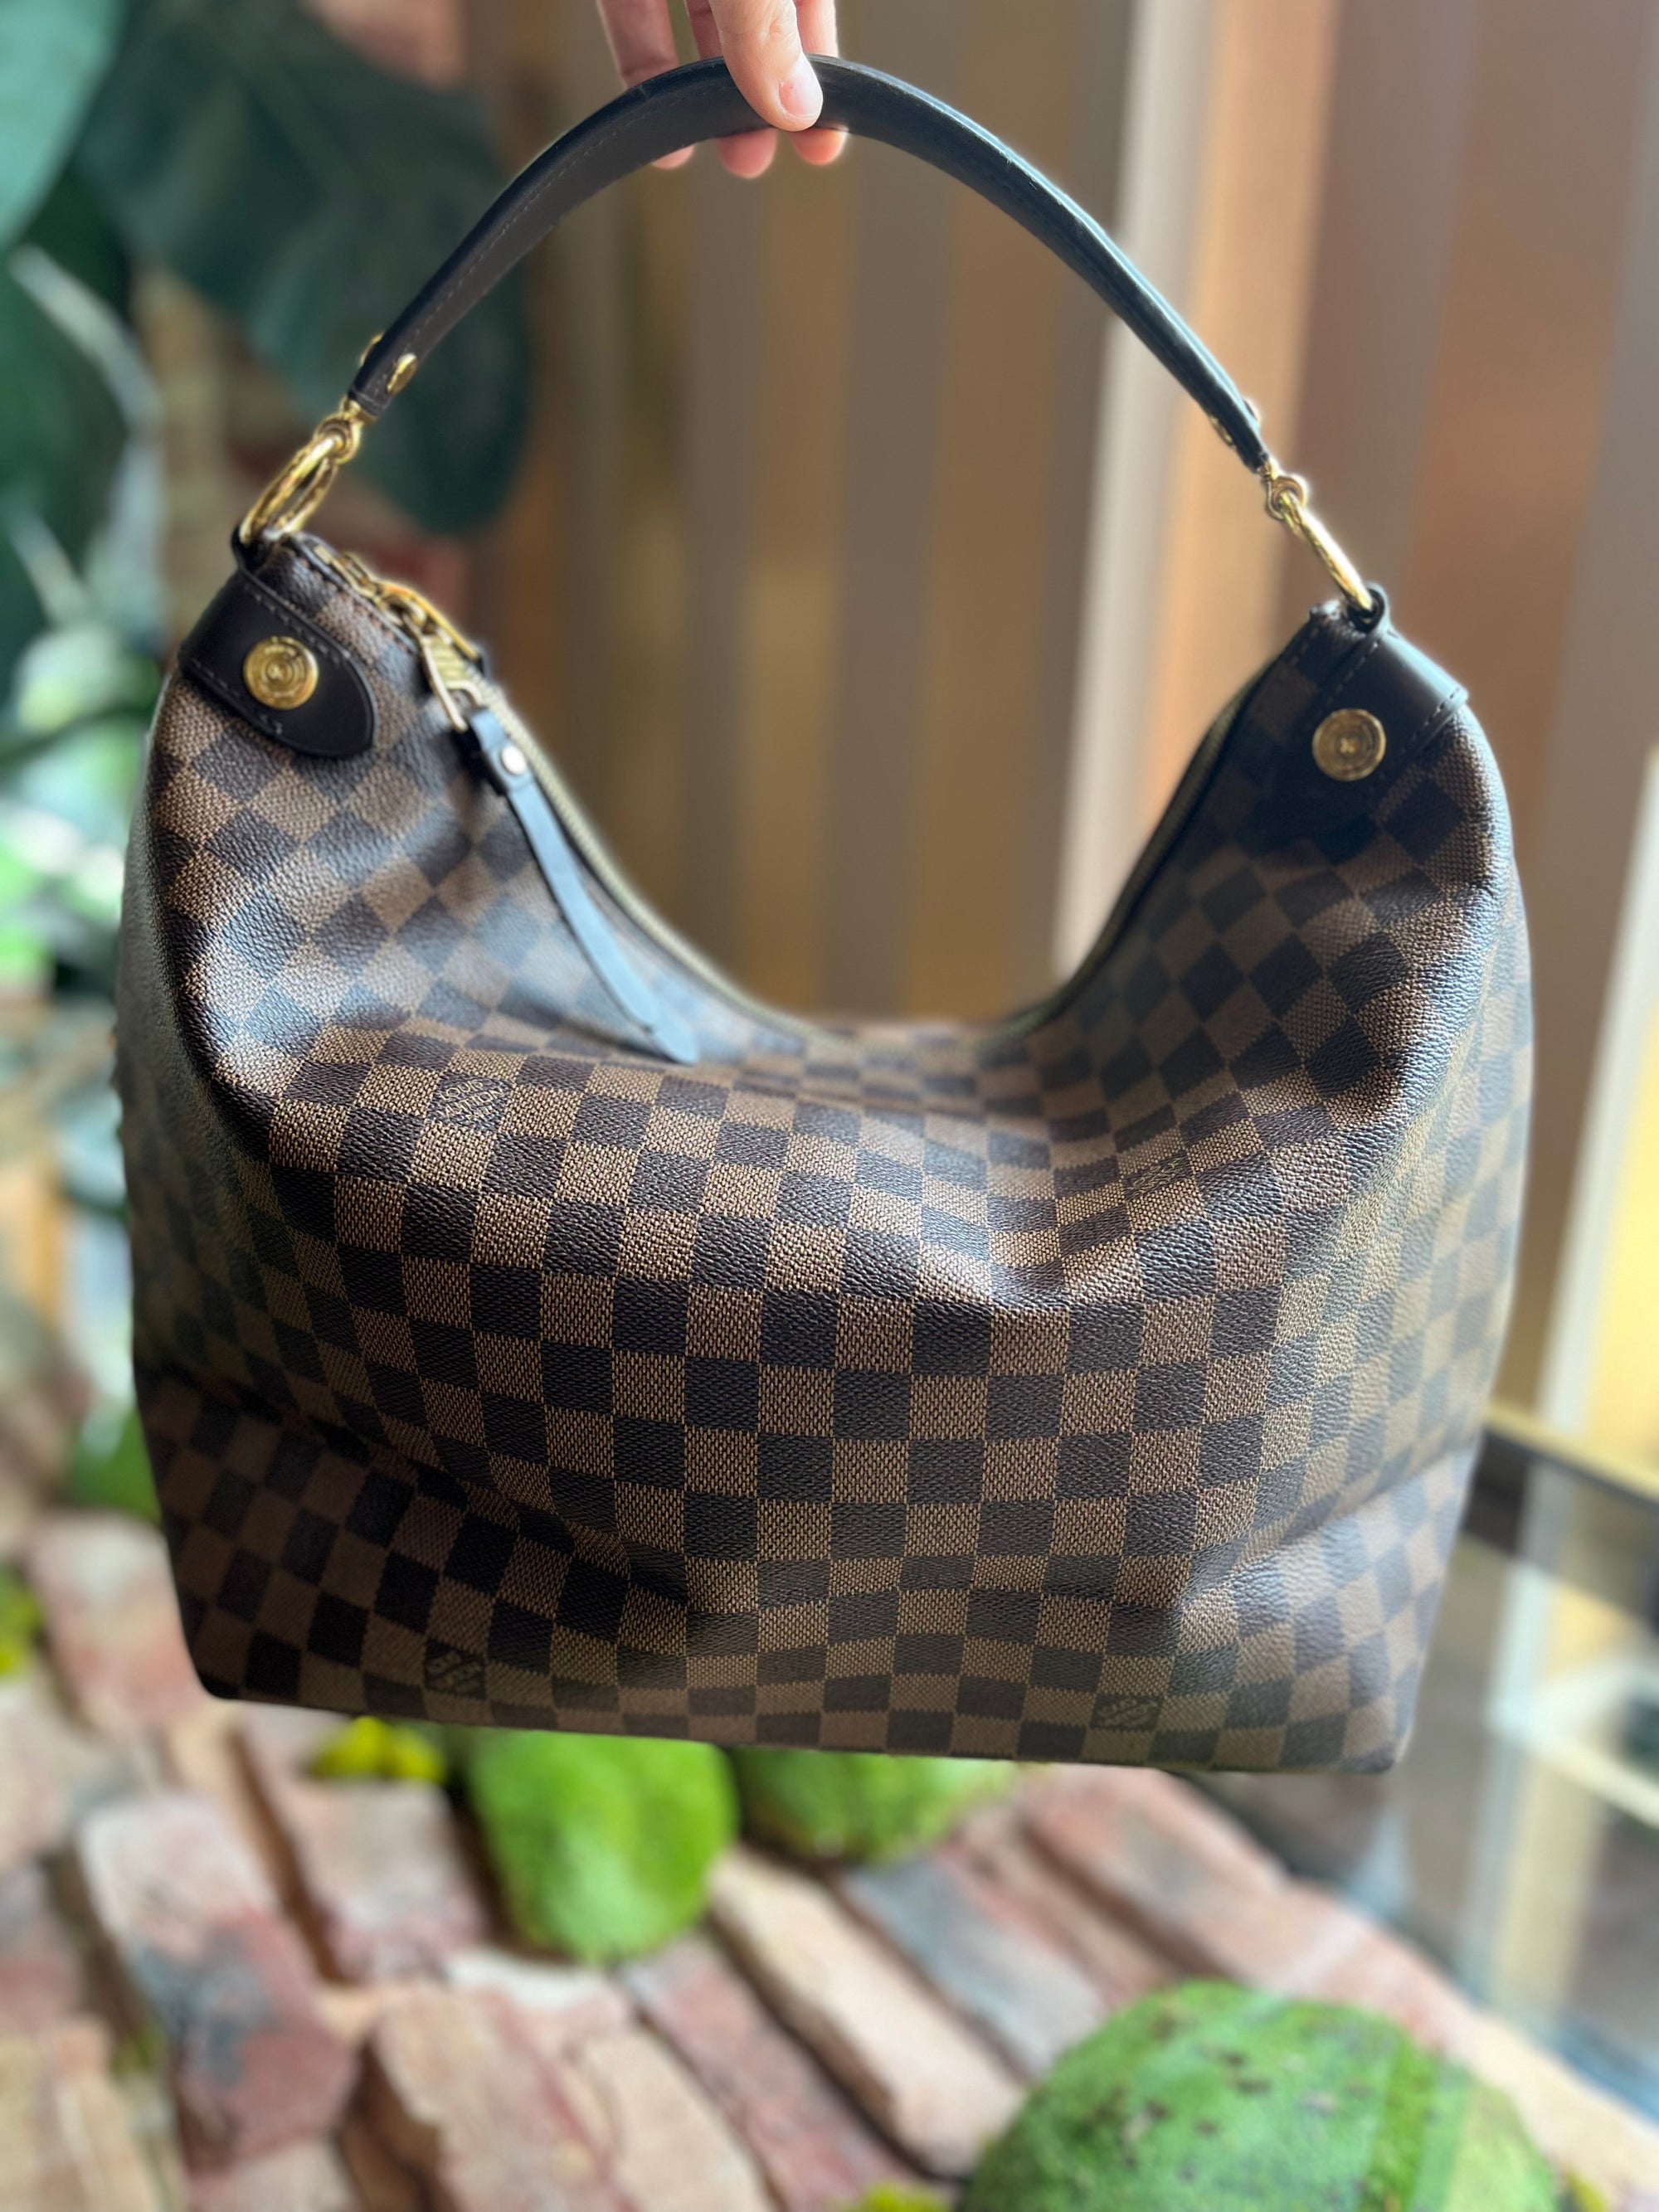 All About Louis Vuitton - The Purse Ladies